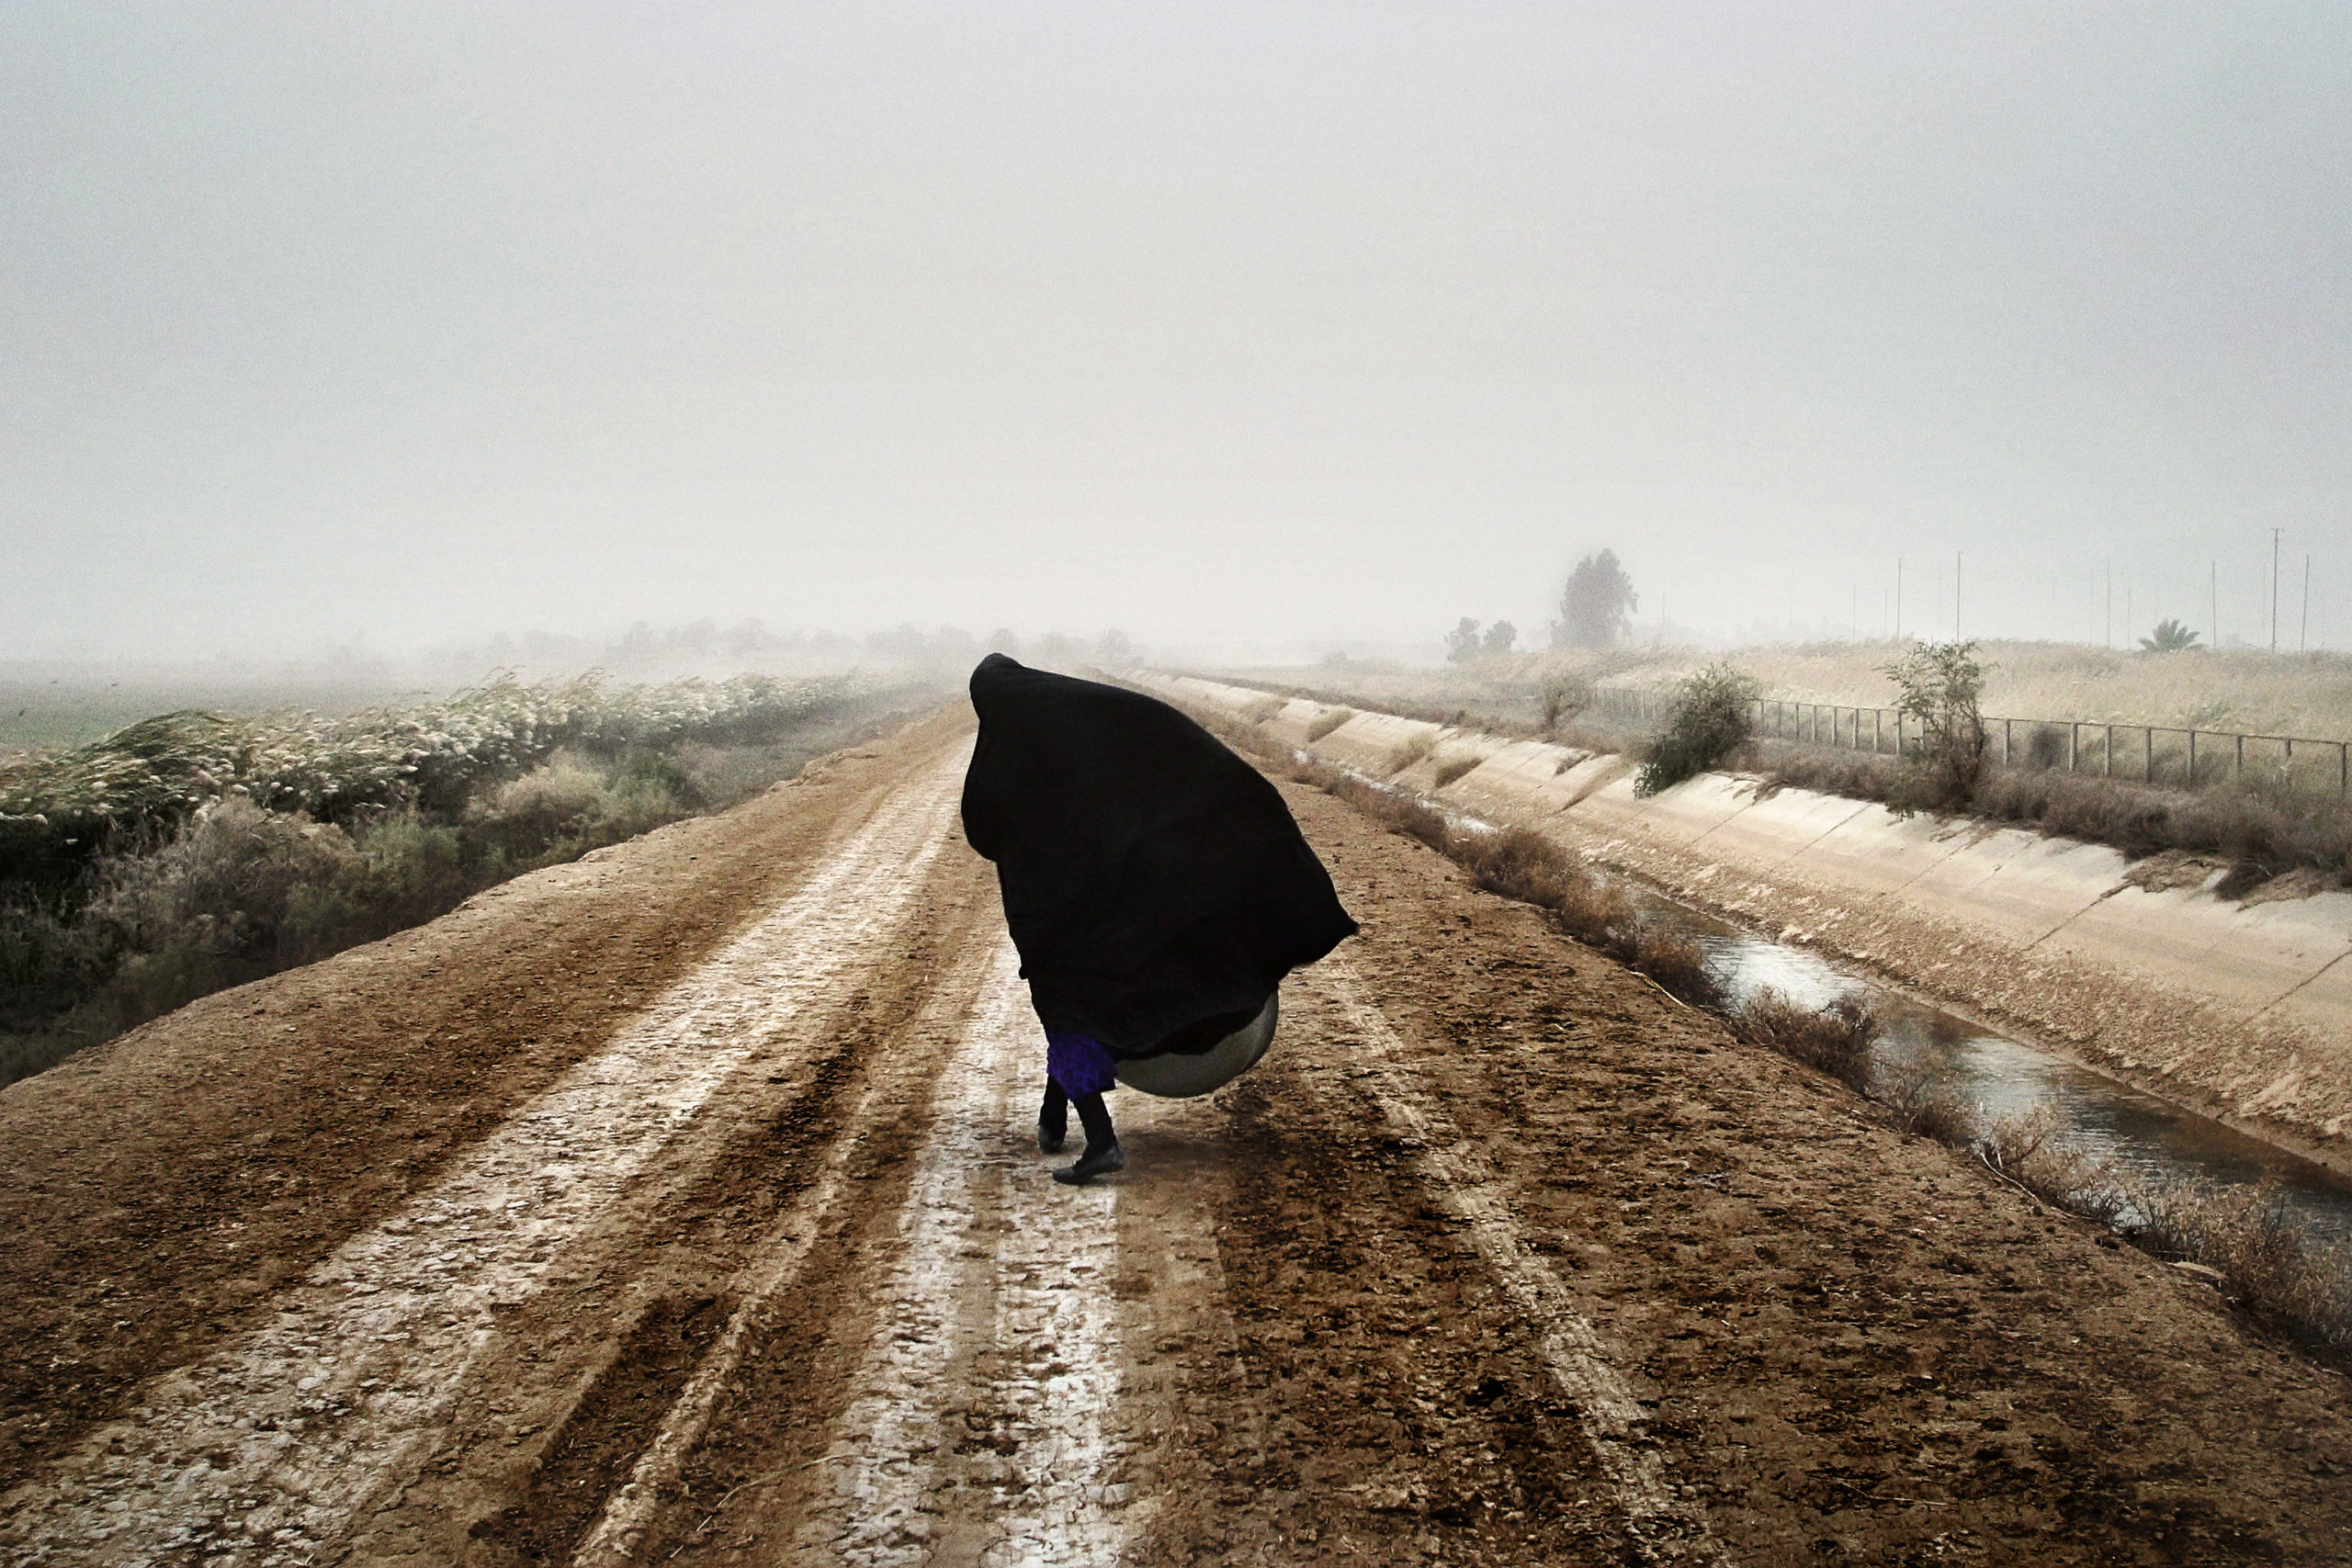 An Iraqi woman walks on a road south of Baghdad, Dec. 20, 2002, prior to the U.S. invasion in March 2003.